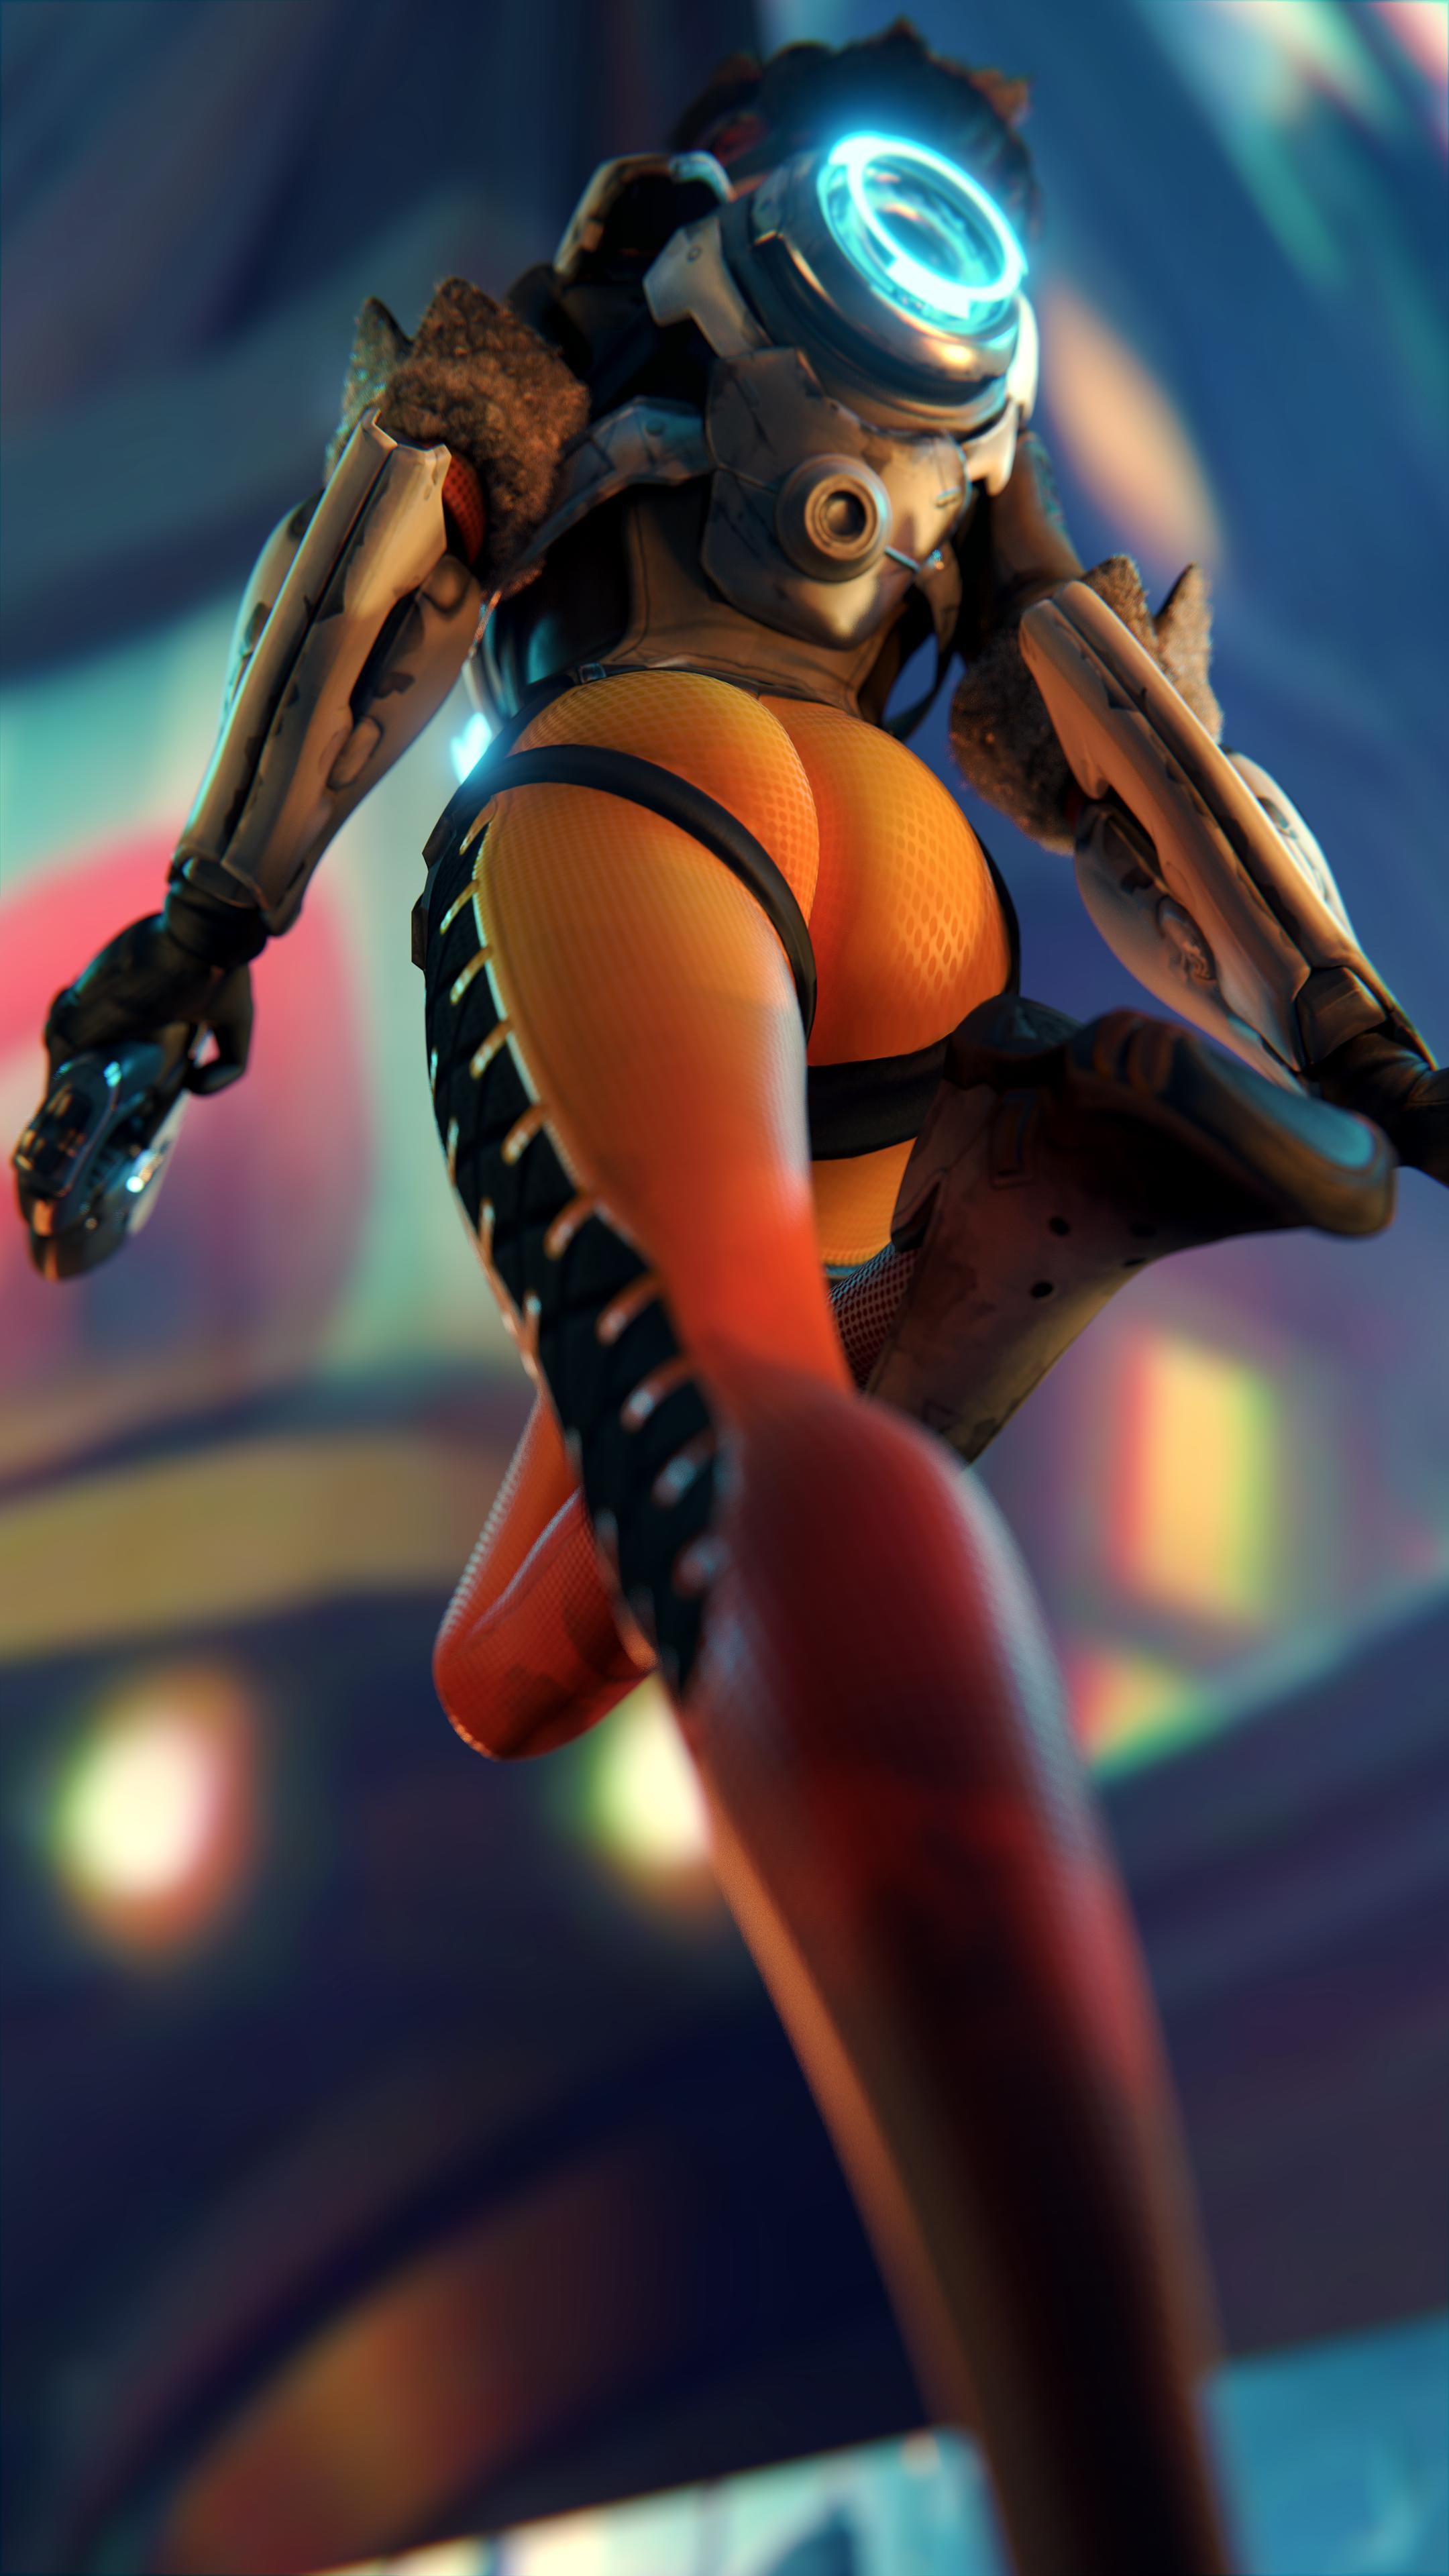 General 2160x3840 Overwatch Tracer (Overwatch) Blizzard Entertainment Blender yeero (Author) video games ass portrait display women PC gaming video game girls rear view